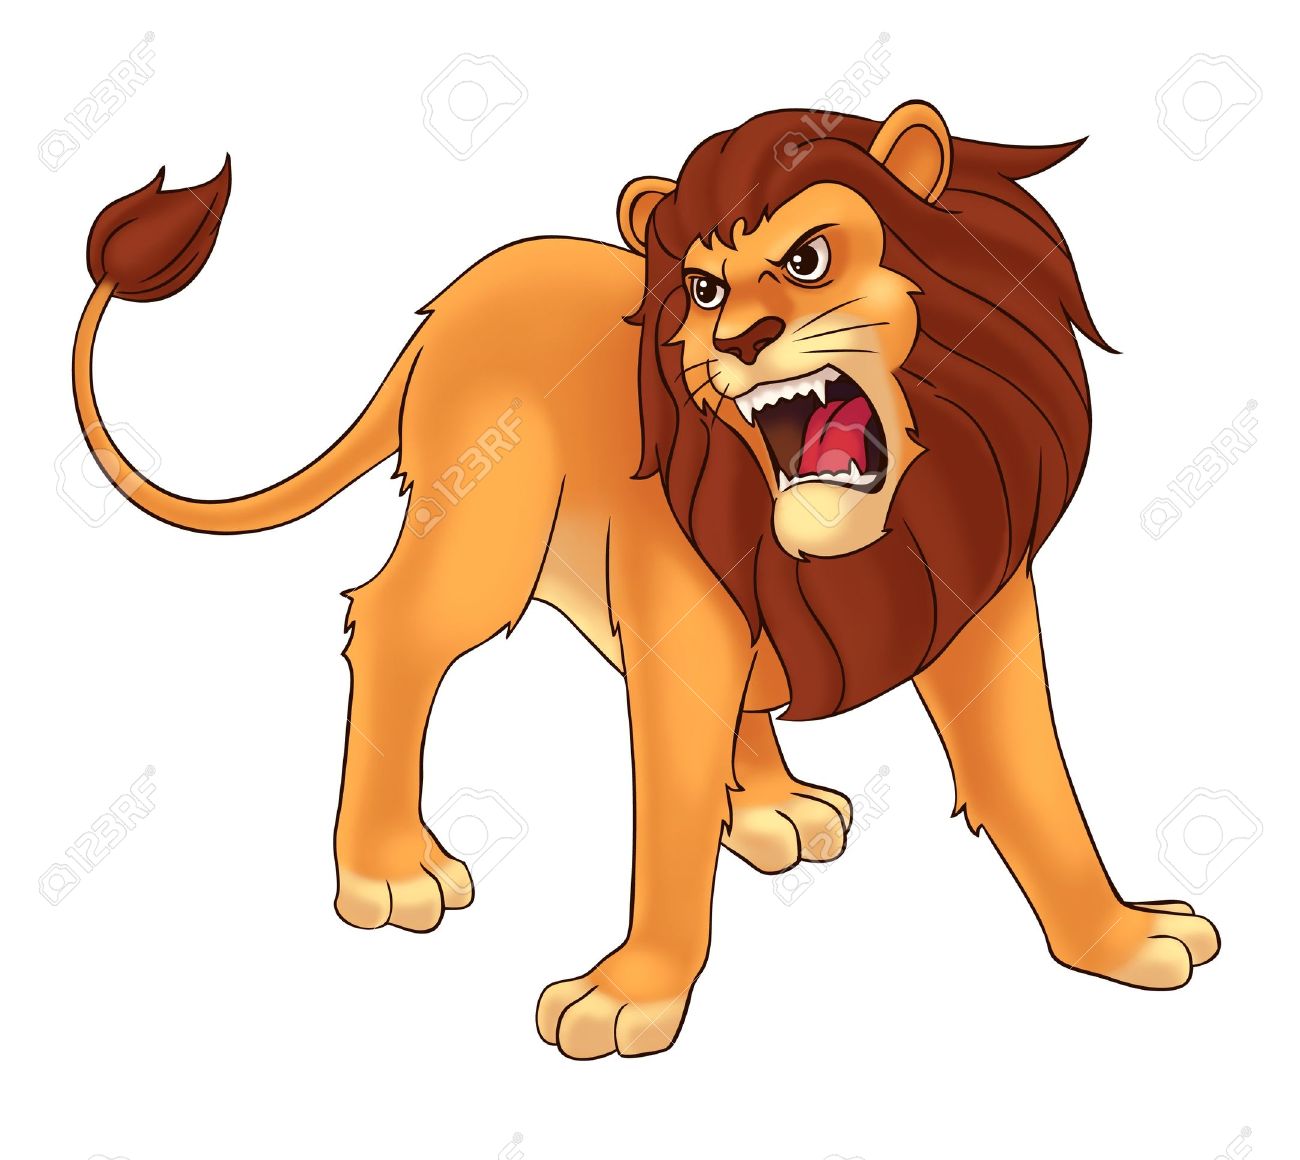 lion roaring clipart images - Clipground